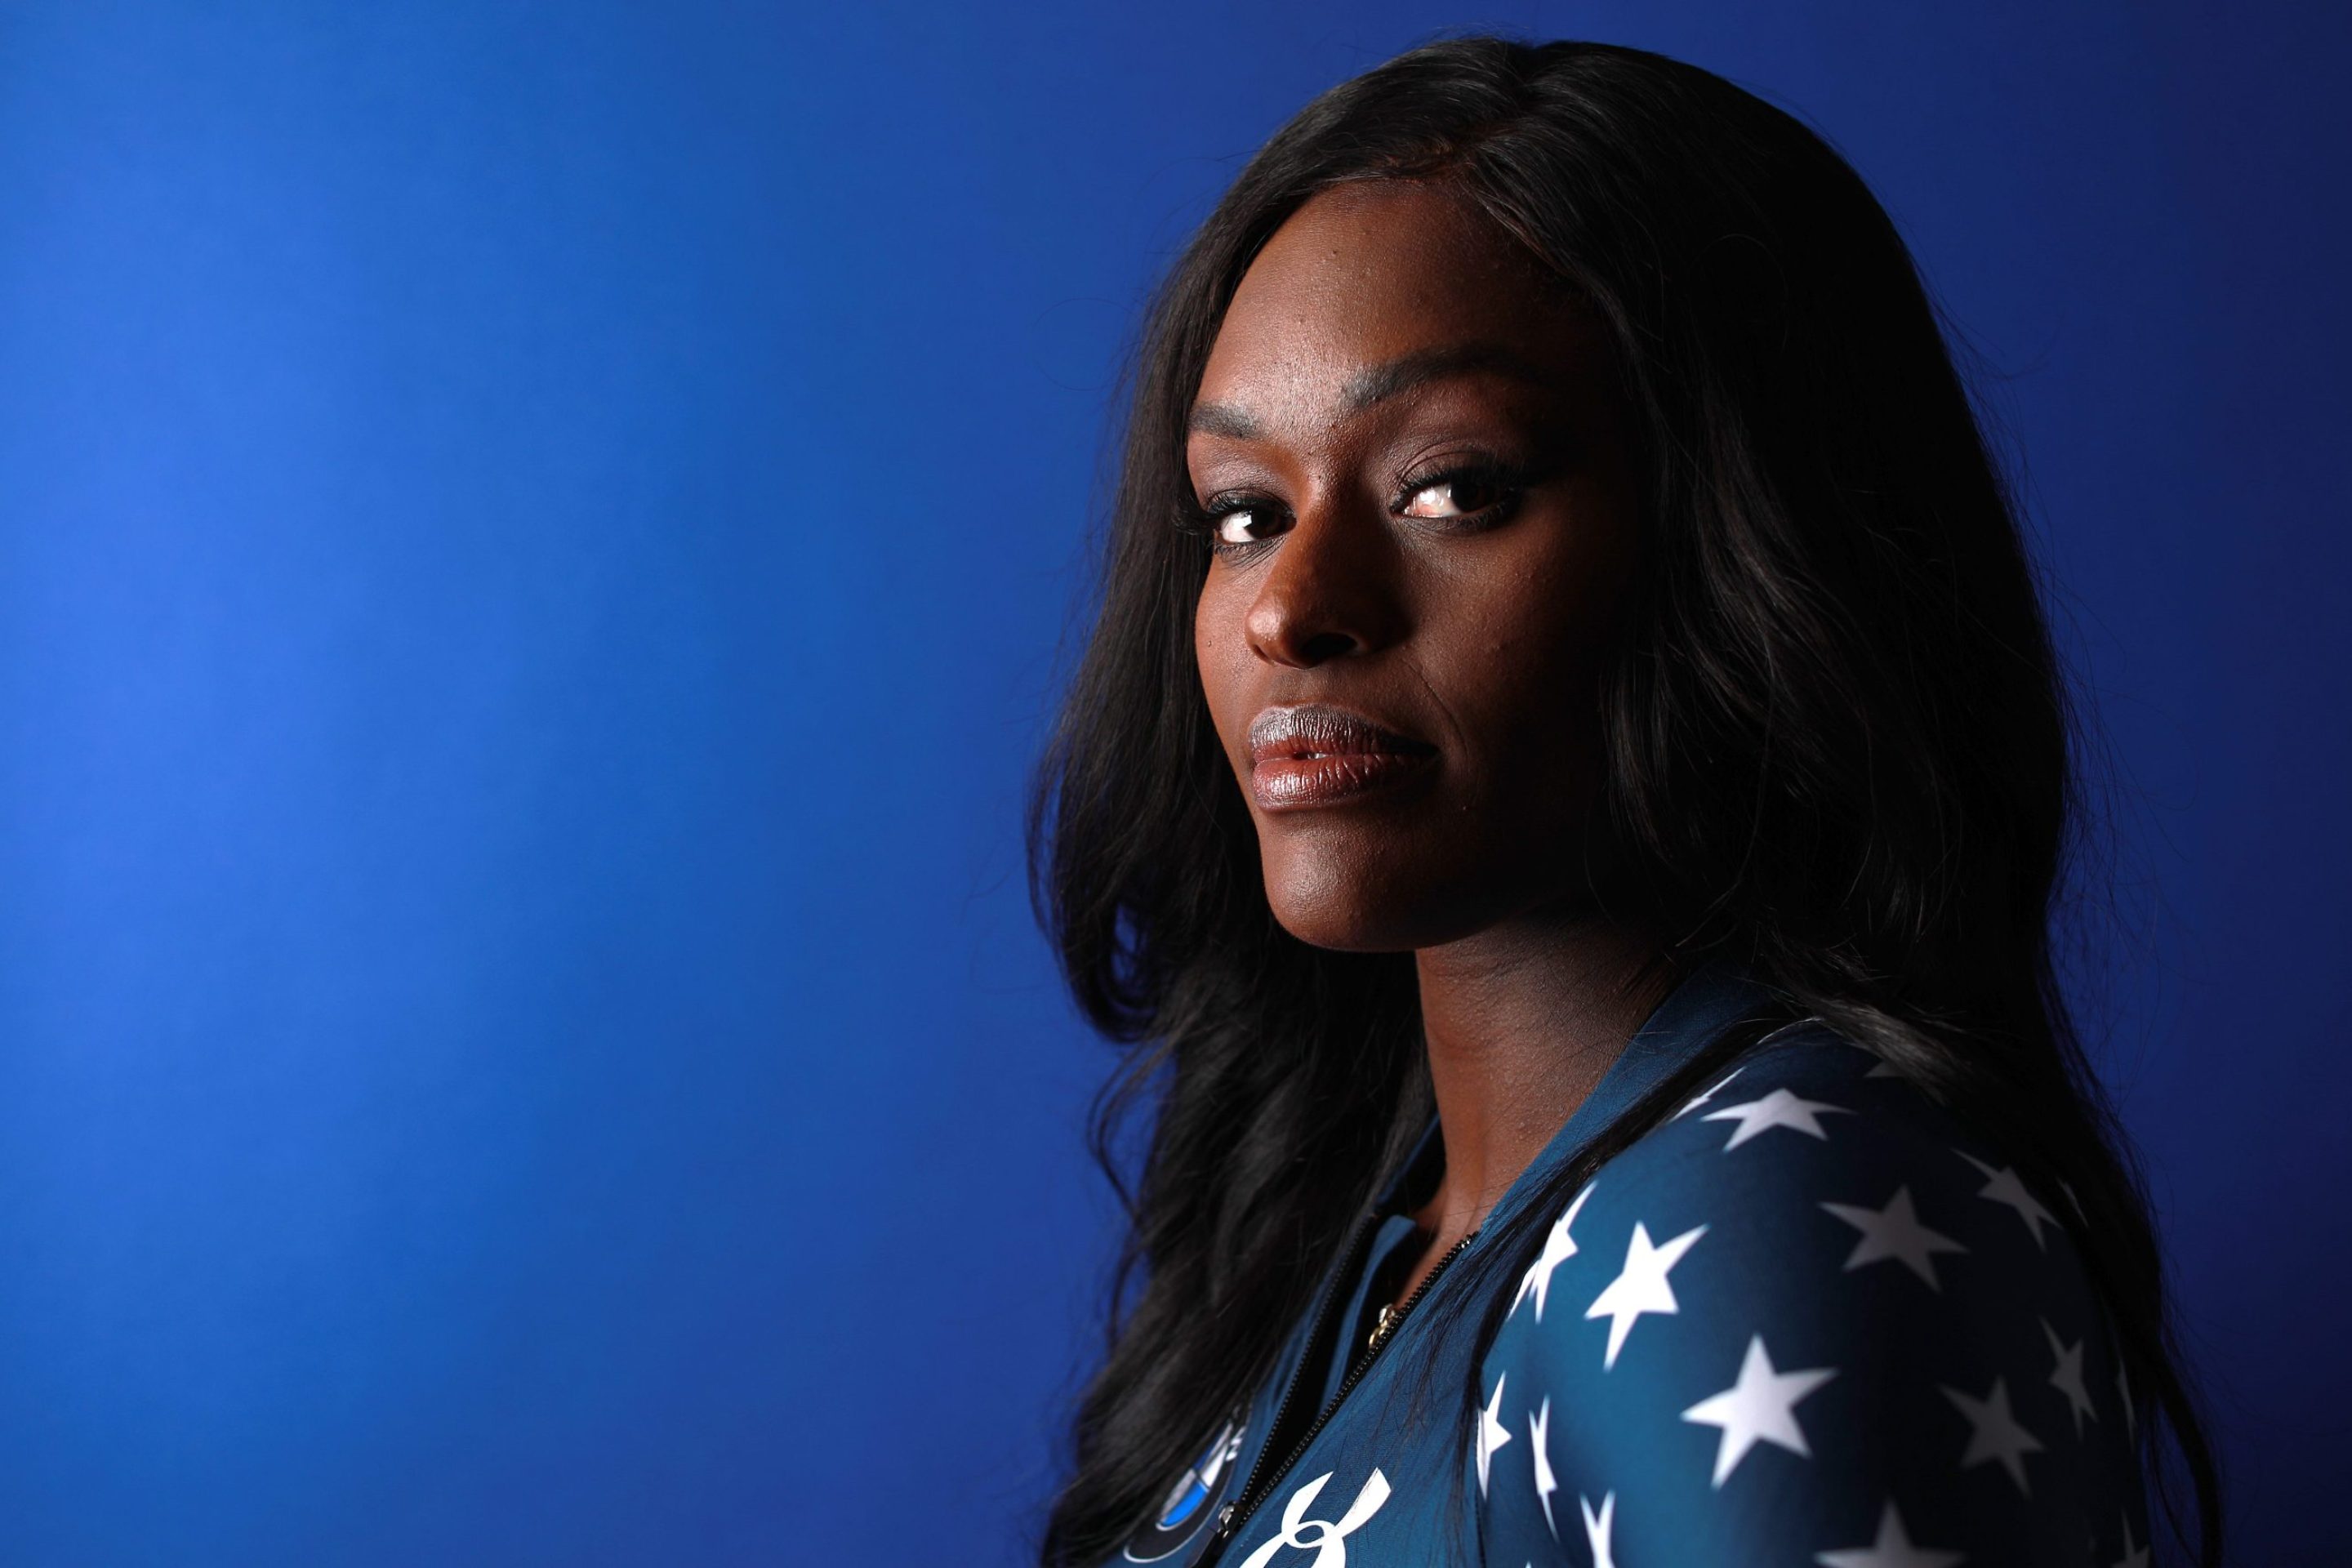 Bobsledder Aja Evans poses for a portrait during the Team USA Media Summit ahead of the PyeongChang 2018 Olympic Winter Games on September 25, 2017 in Park City, Utah.